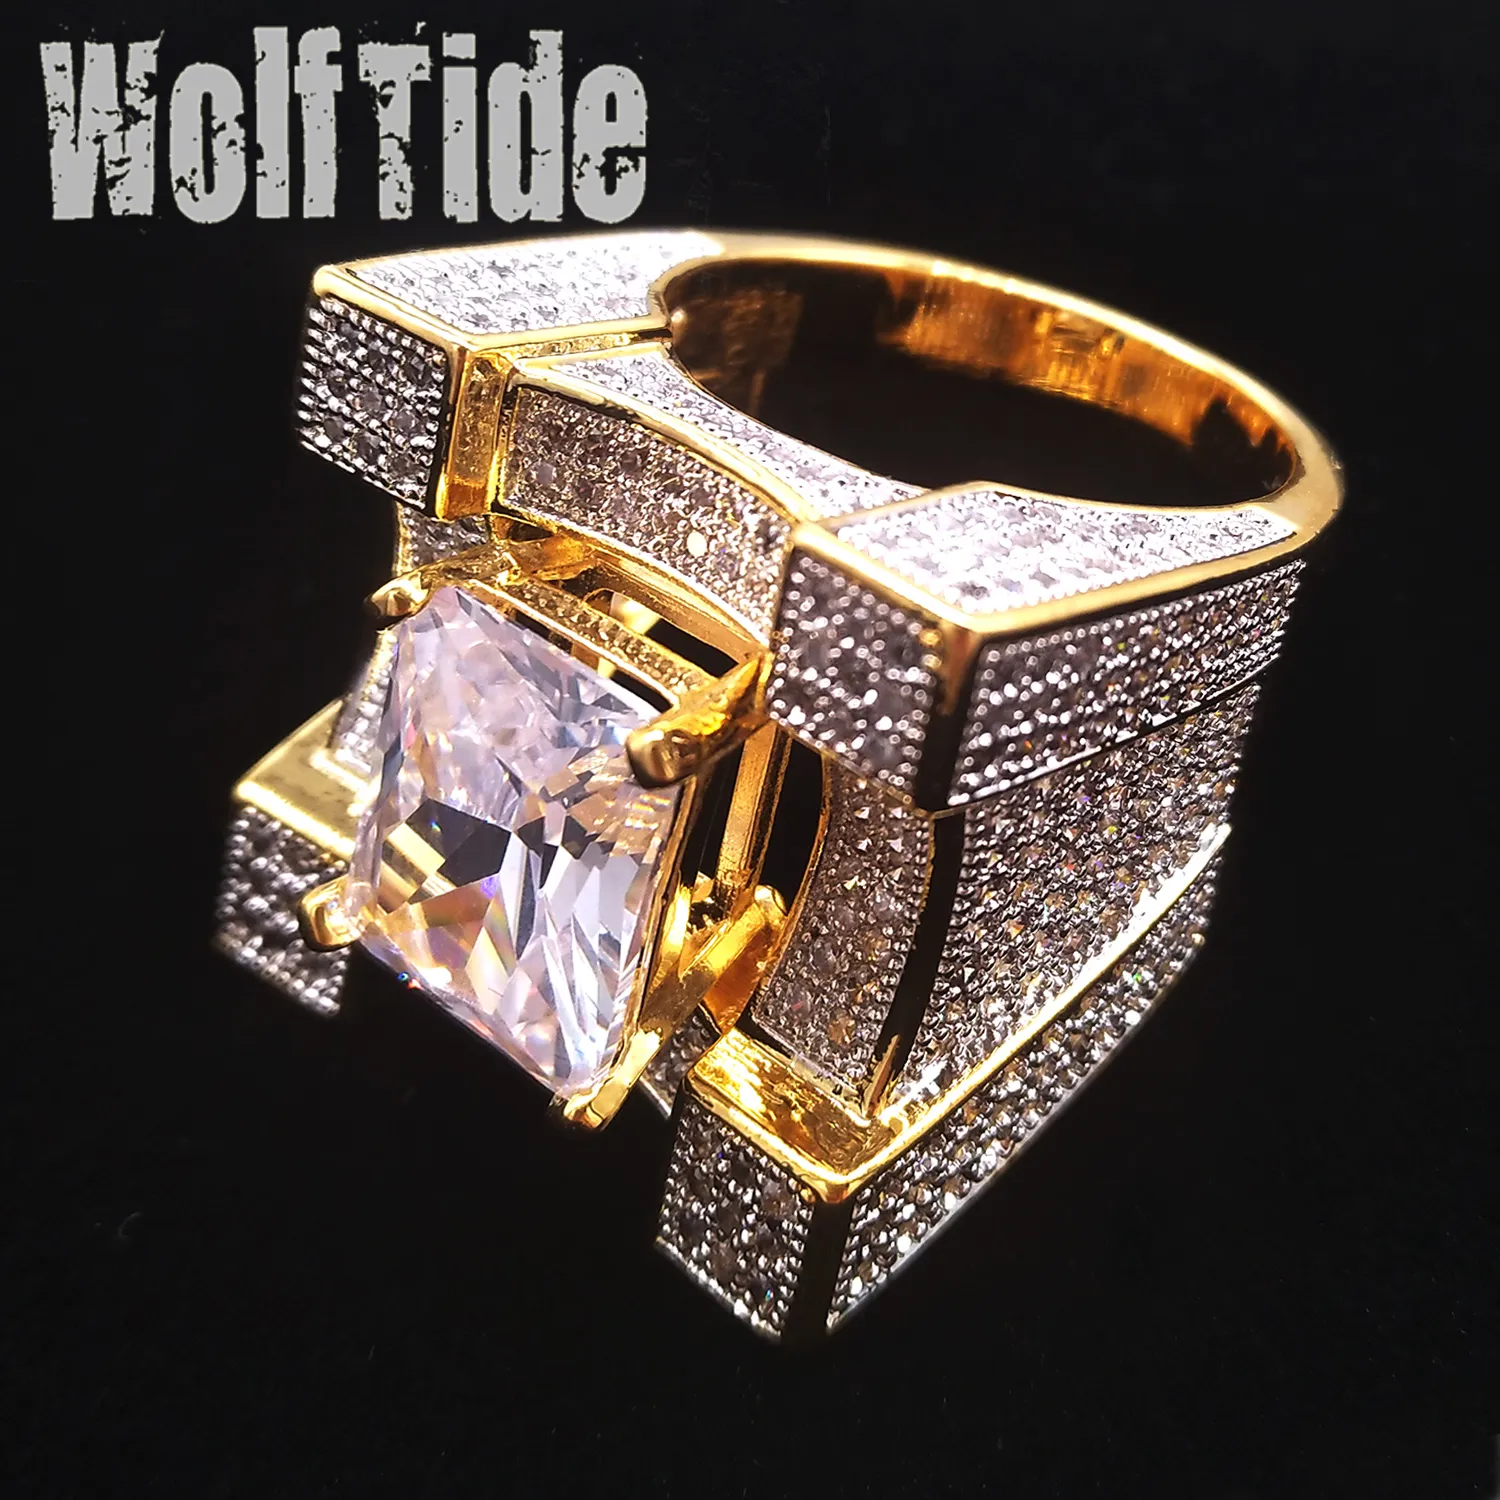 24mm Big Heavy Cubic Zirconia Square Hip Hop Ring for Men Top Quality Personalized Full CZ Stone Punk Rock Rapper Jewelry for Men Size 7 to 11 Comfort Fit 18K Gold Plated